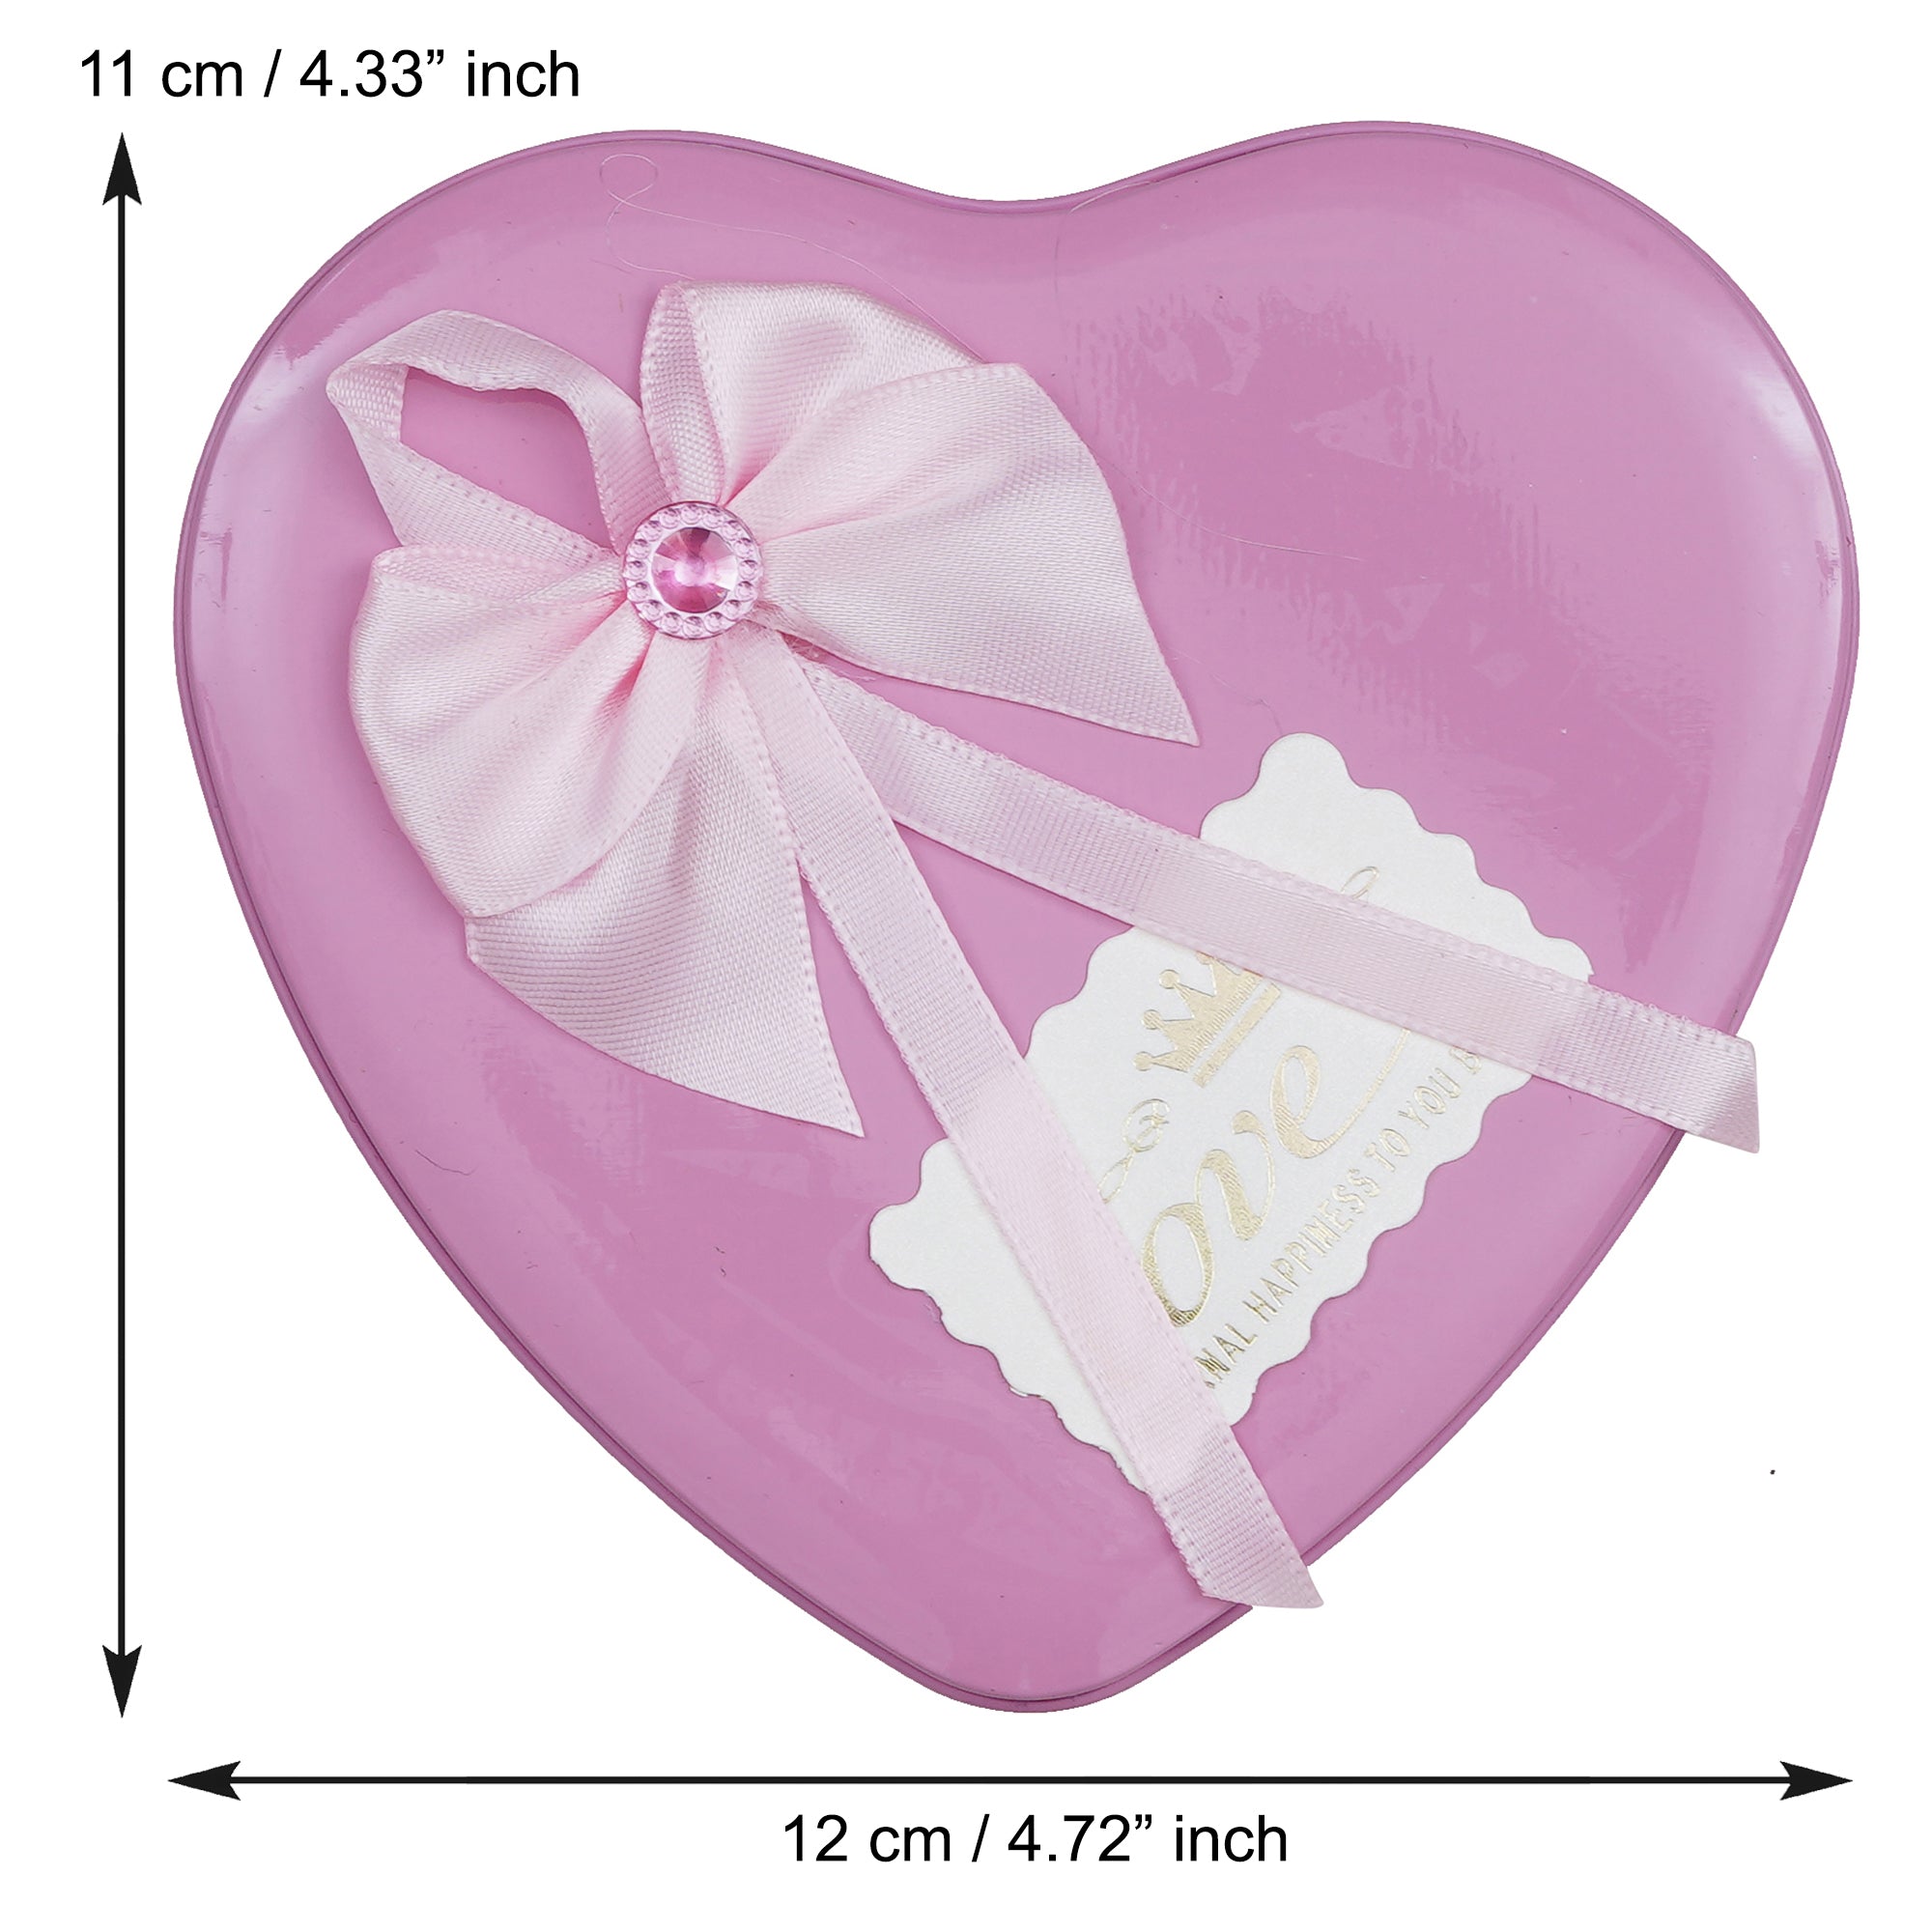 Valentine Combo of Golden Rose Gift Set, Pink Heart Shaped Gift Box with Teddy and Roses 4